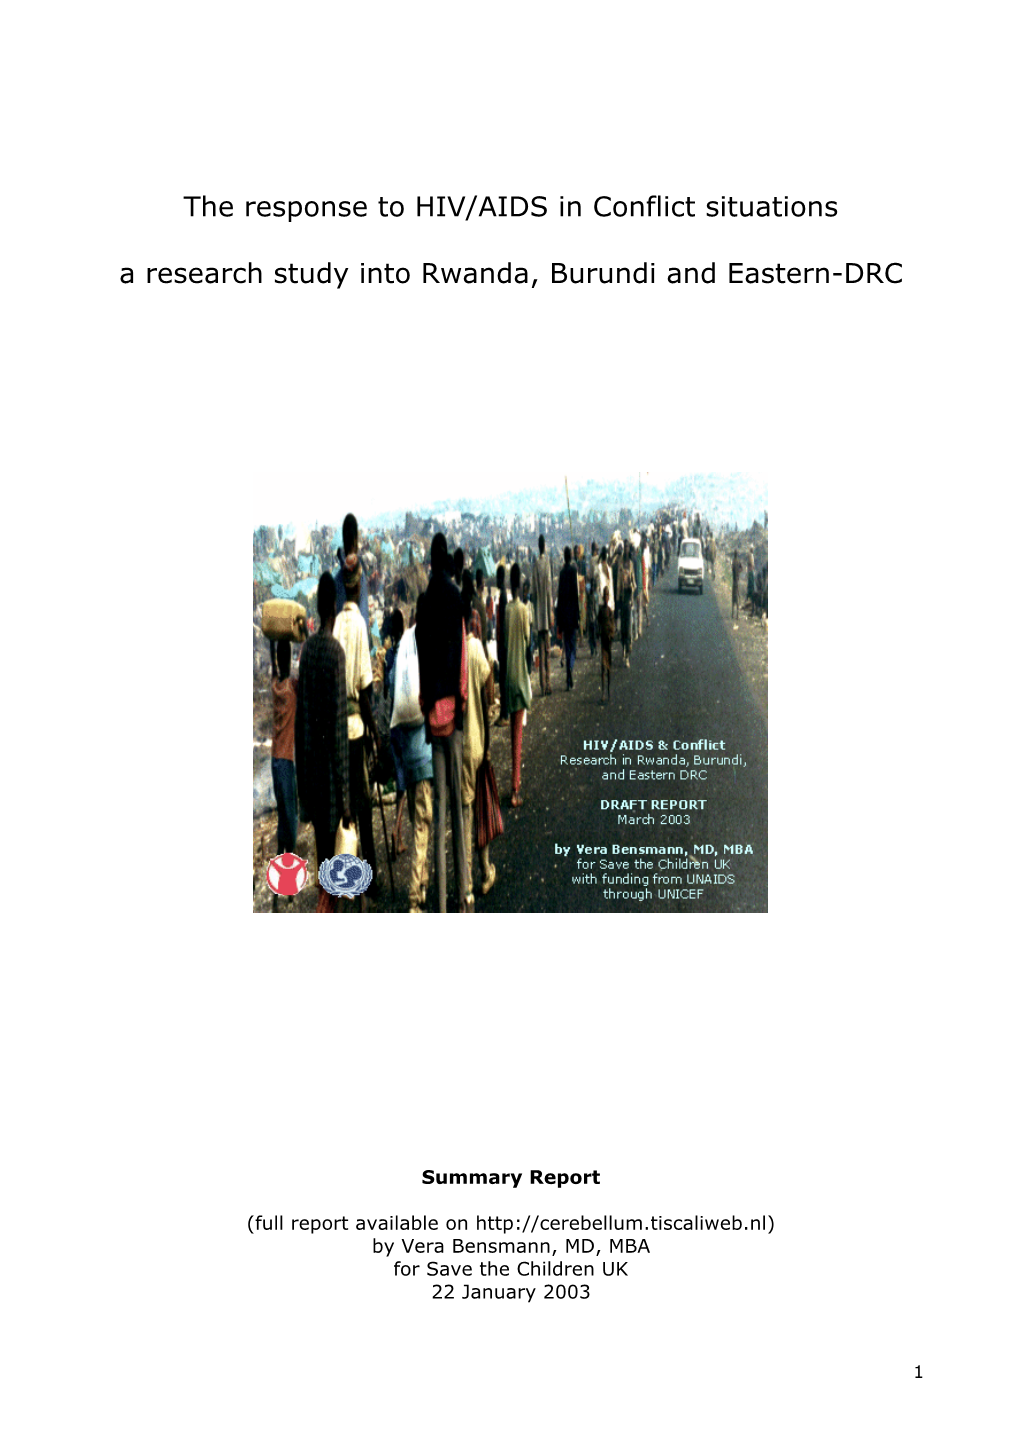 The Response to HIV/AIDS in Conflict Situations a Research Study Into Rwanda, Burundi and Eastern-DRC